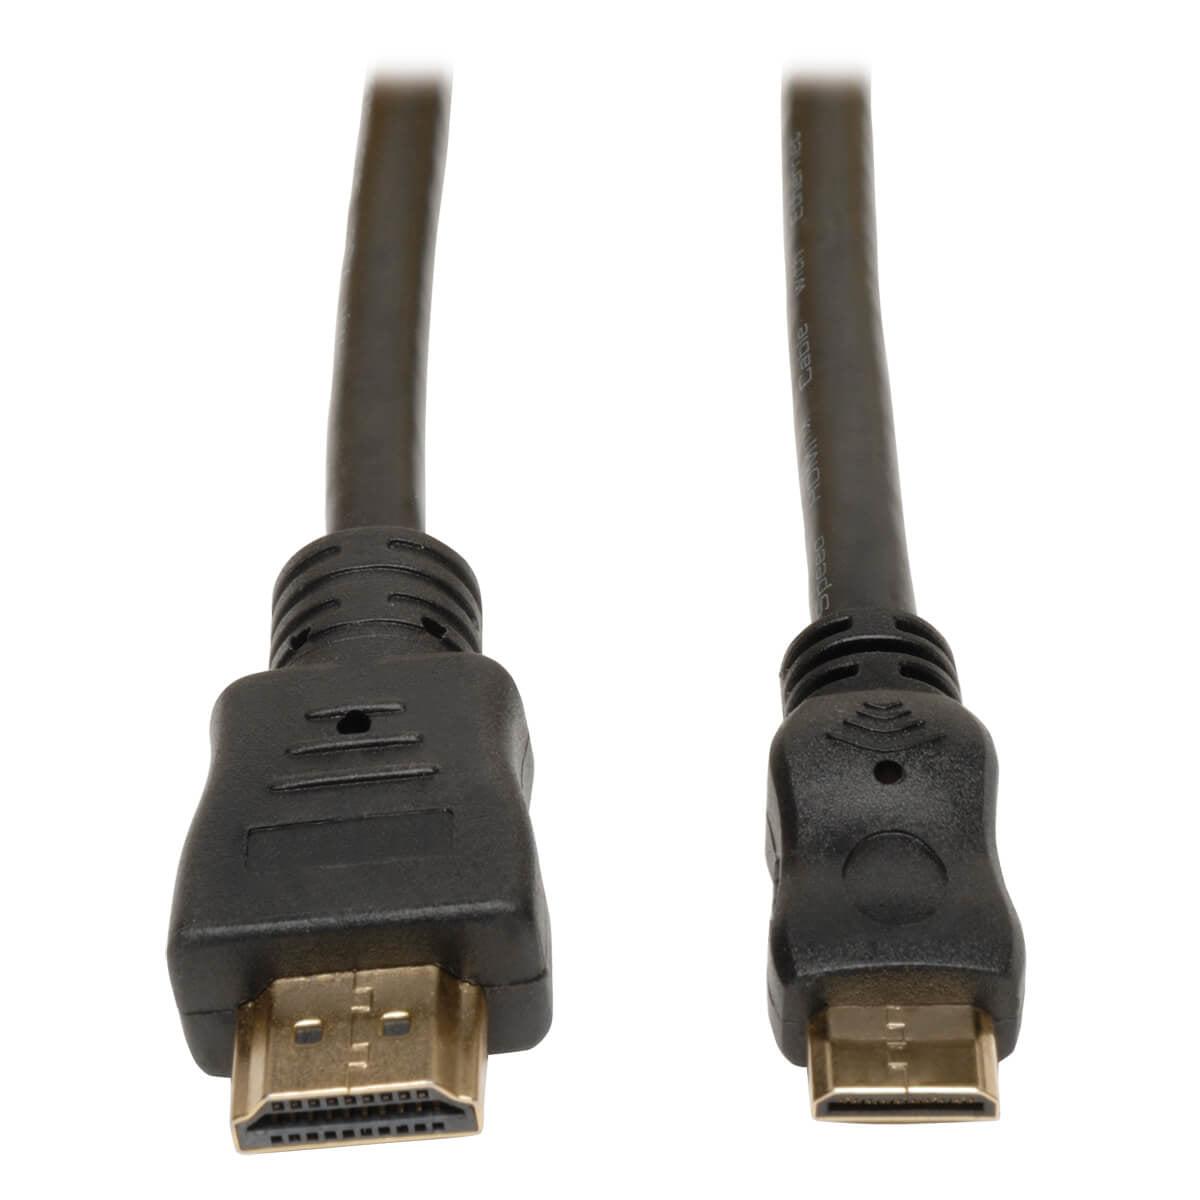 Tripp Lite P571-003-Mini High-Speed Hdmi To Mini Hdmi Cable With Ethernet (M/M), 3 Ft.